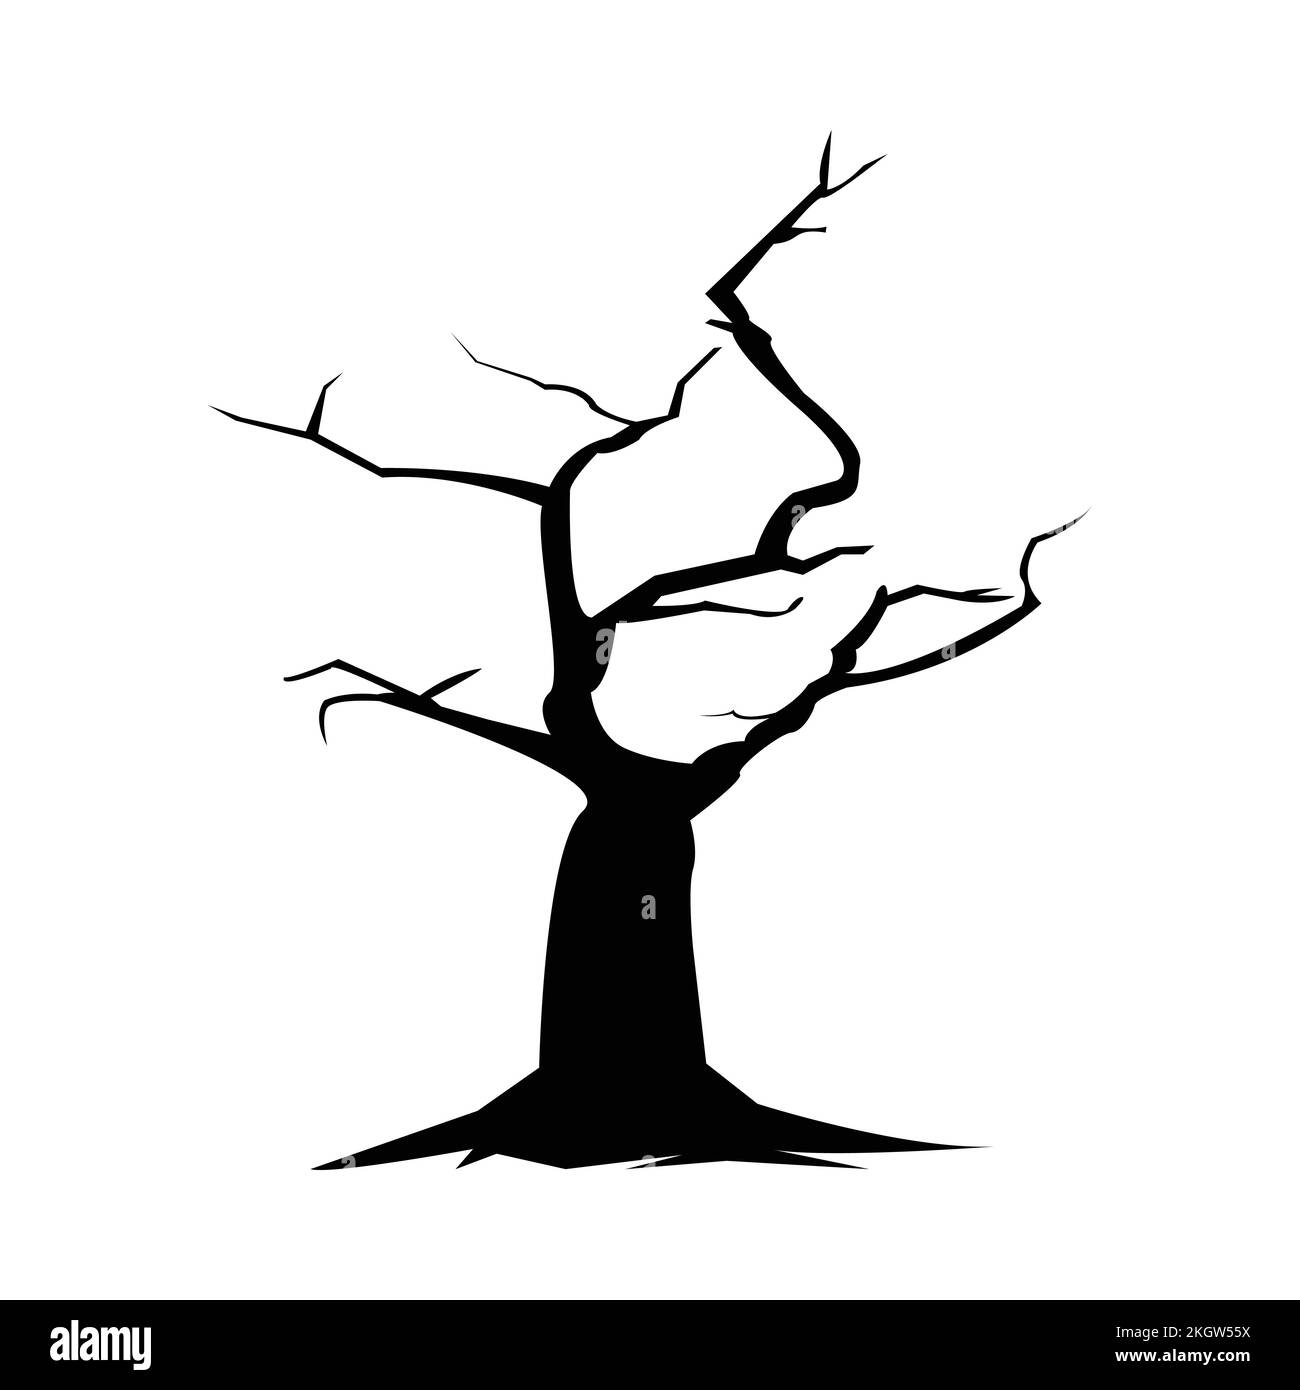 Dead tree silhouette vector illustration on a white background. Halloween big tree silhouette design with dark black color. Spooky vector design for H Stock Vector